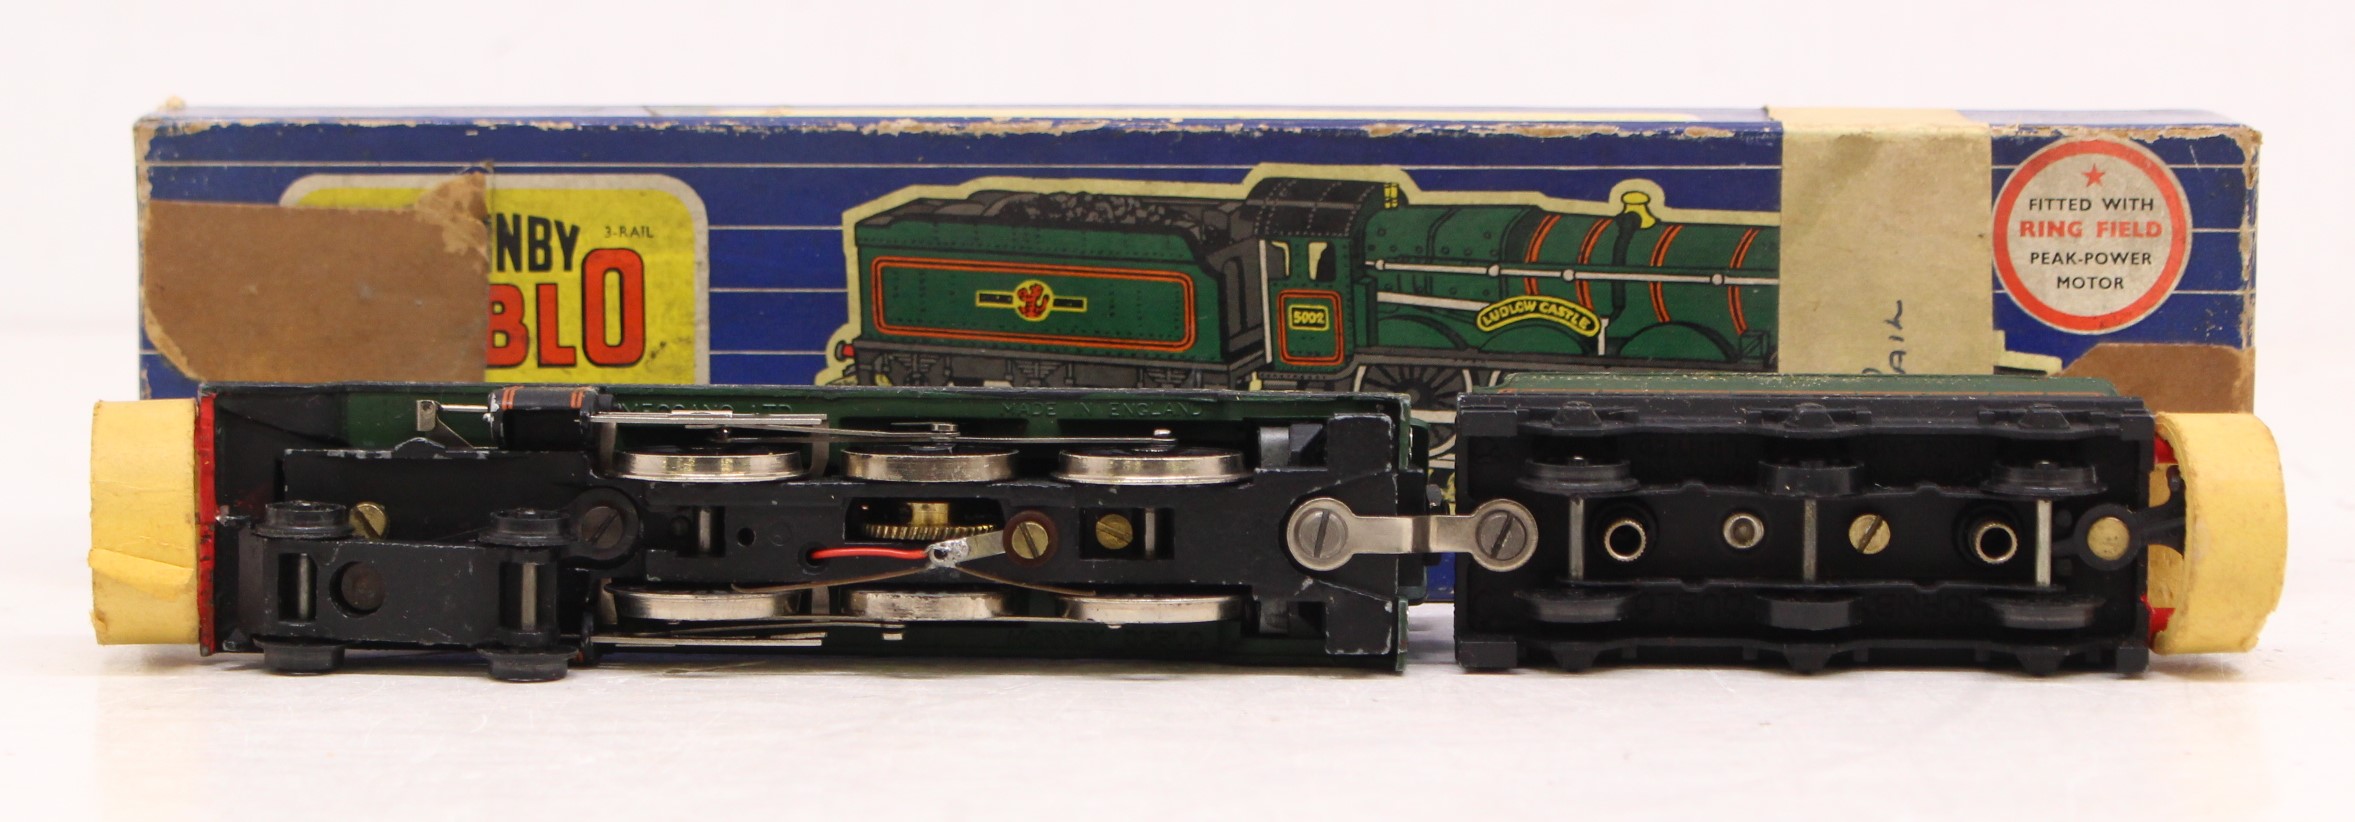 Hornby: A boxed Hornby Dublo, 2-Rail, Ludlow Castle Locomotive and Tender, Reference 3221. - Image 2 of 2